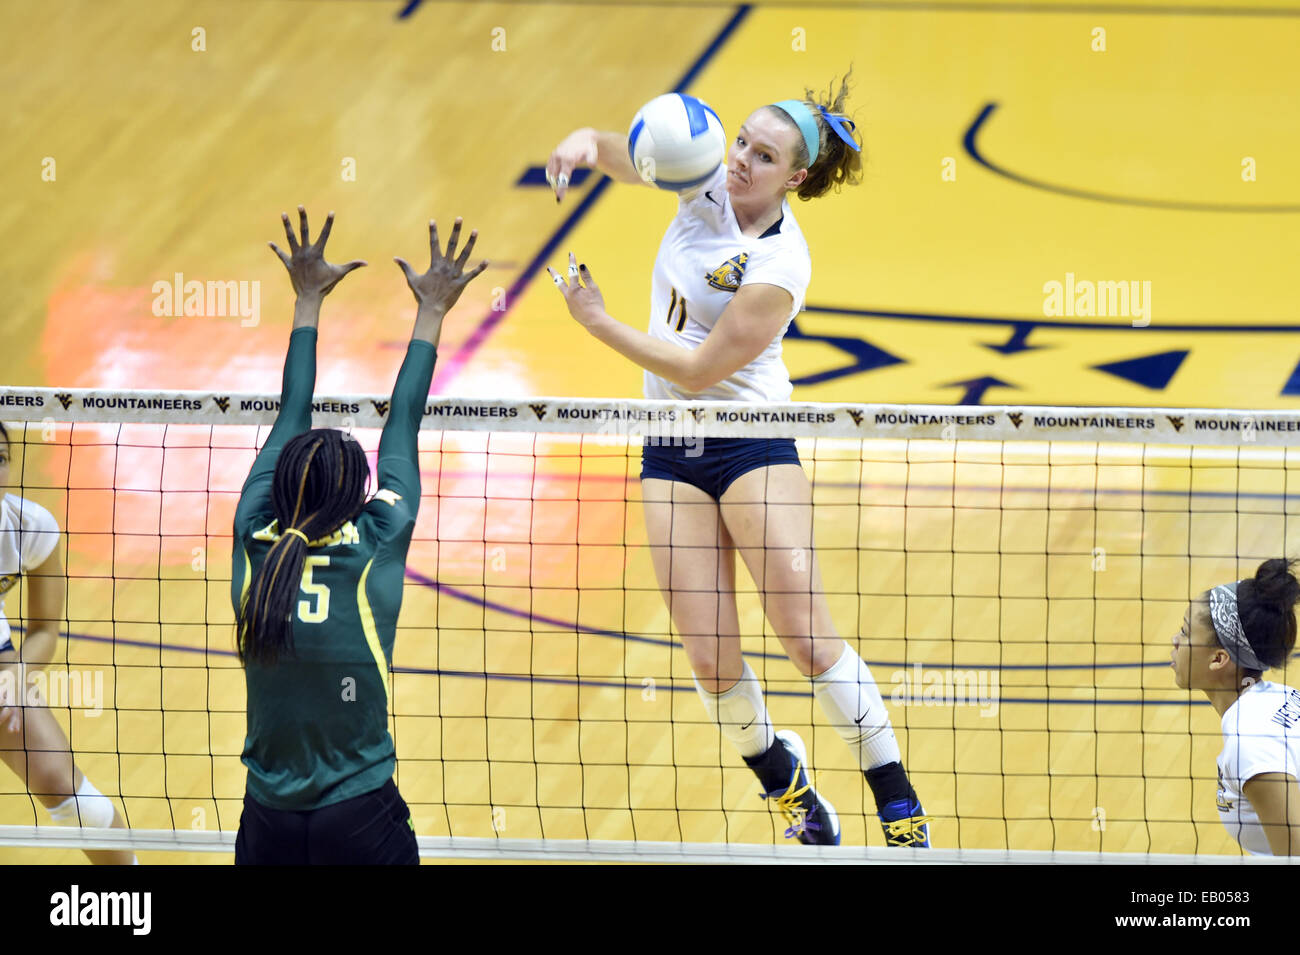 Morgantown, West Virginia, USA. 22nd Nov, 2014. West Virginia outside hitter JORDAN ANDERSON (11) goes up for a spike at the net in a Big 12 conference volleyball match between WVU and Baylor that is being played at the Coliseum in Morgantown, WV. WVU beat Baylor in straight sets. © Ken Inness/ZUMA Wire/Alamy Live News Stock Photo